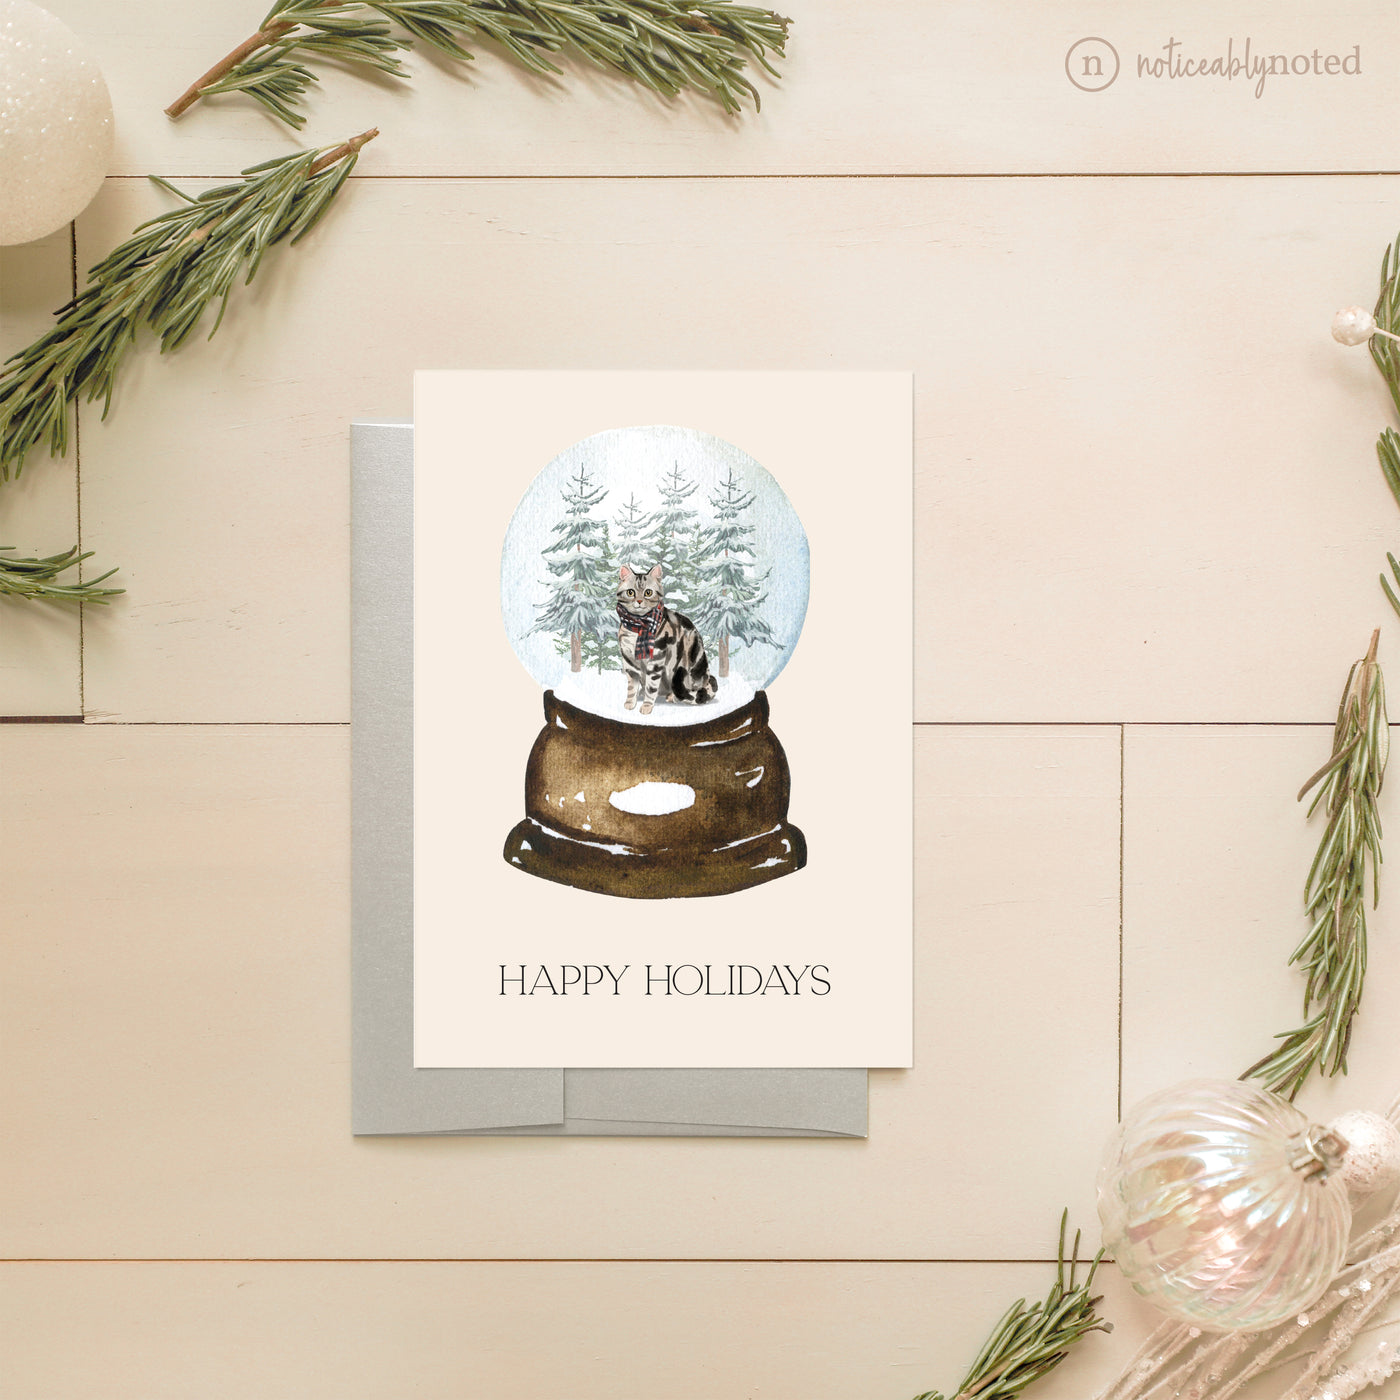 American Shorthair Christmas Cards | Noticeably Noted